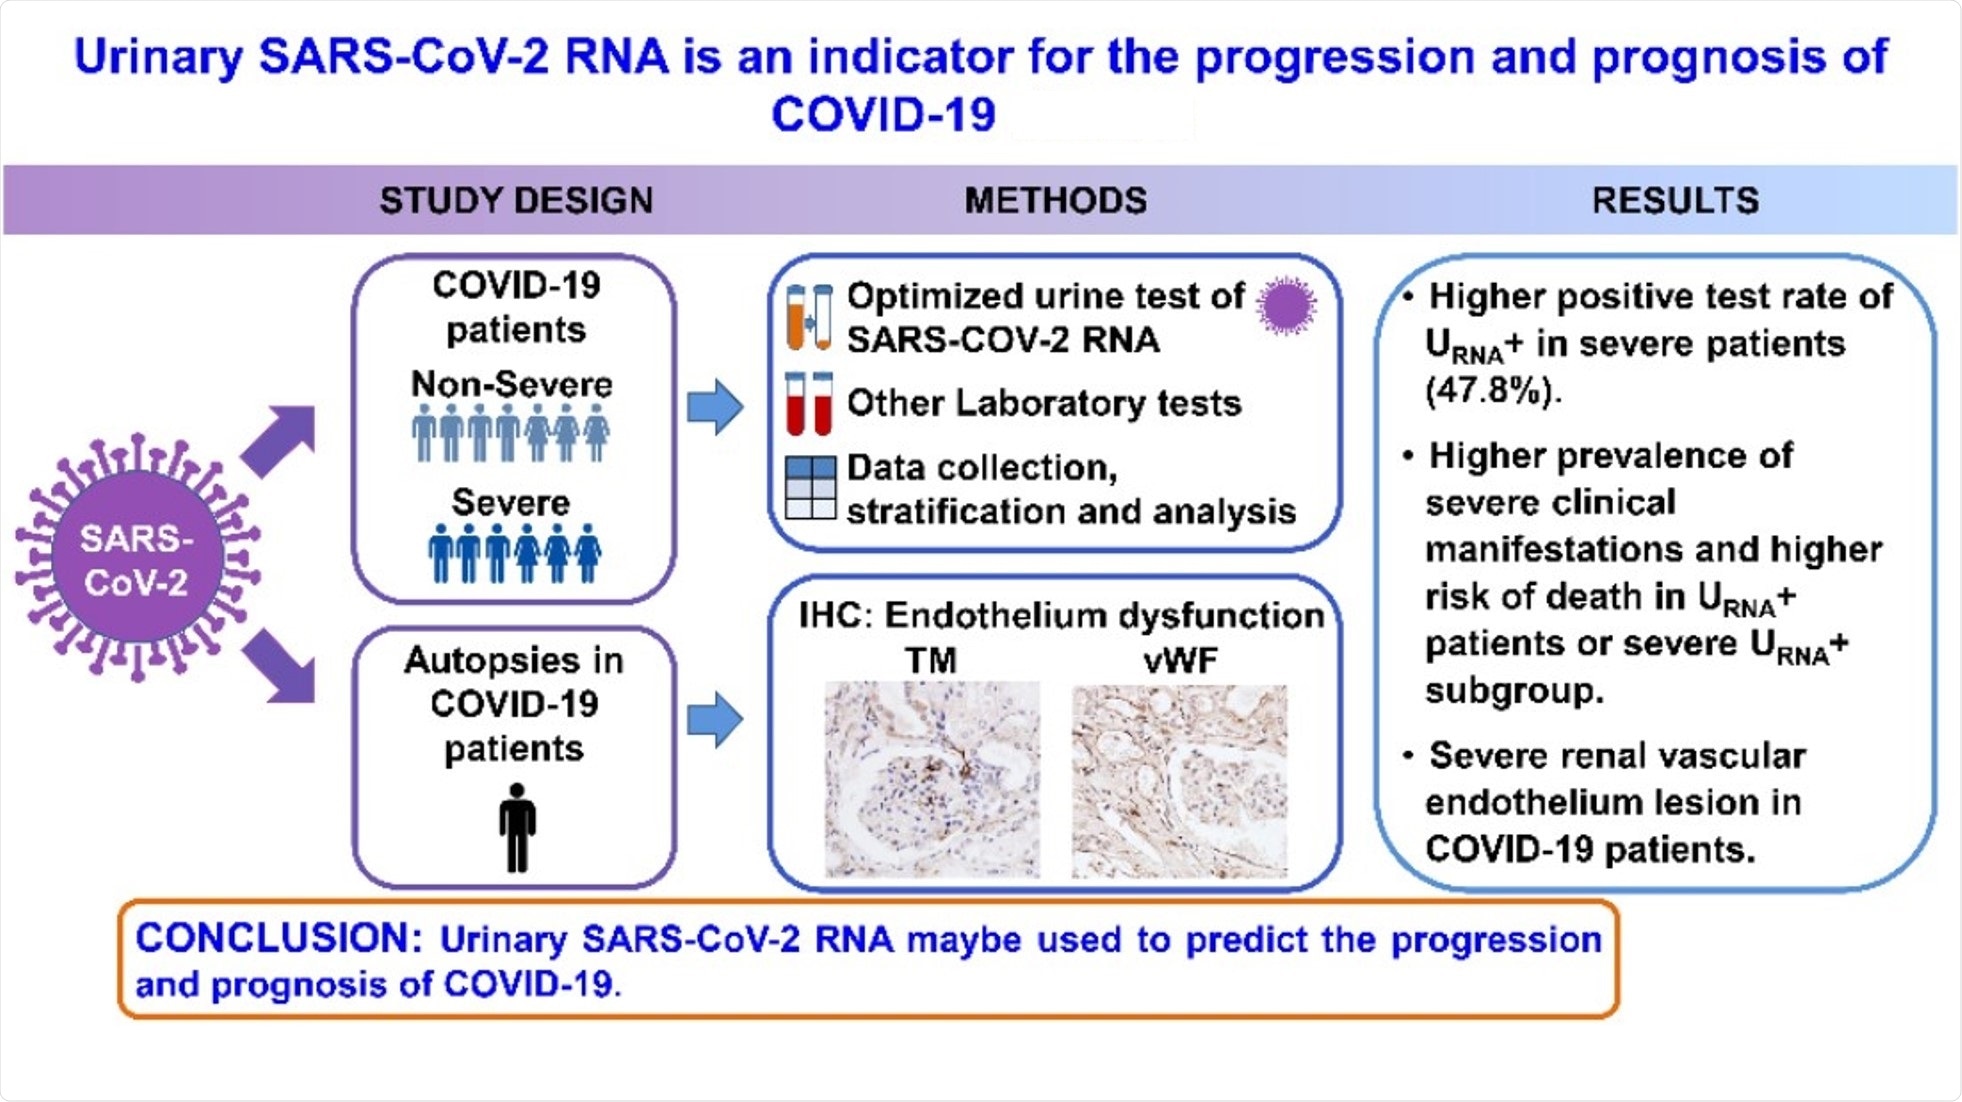 Urinary SARS-CoV-2 RNA is an indicator of the progression and prognosis of COVID-19